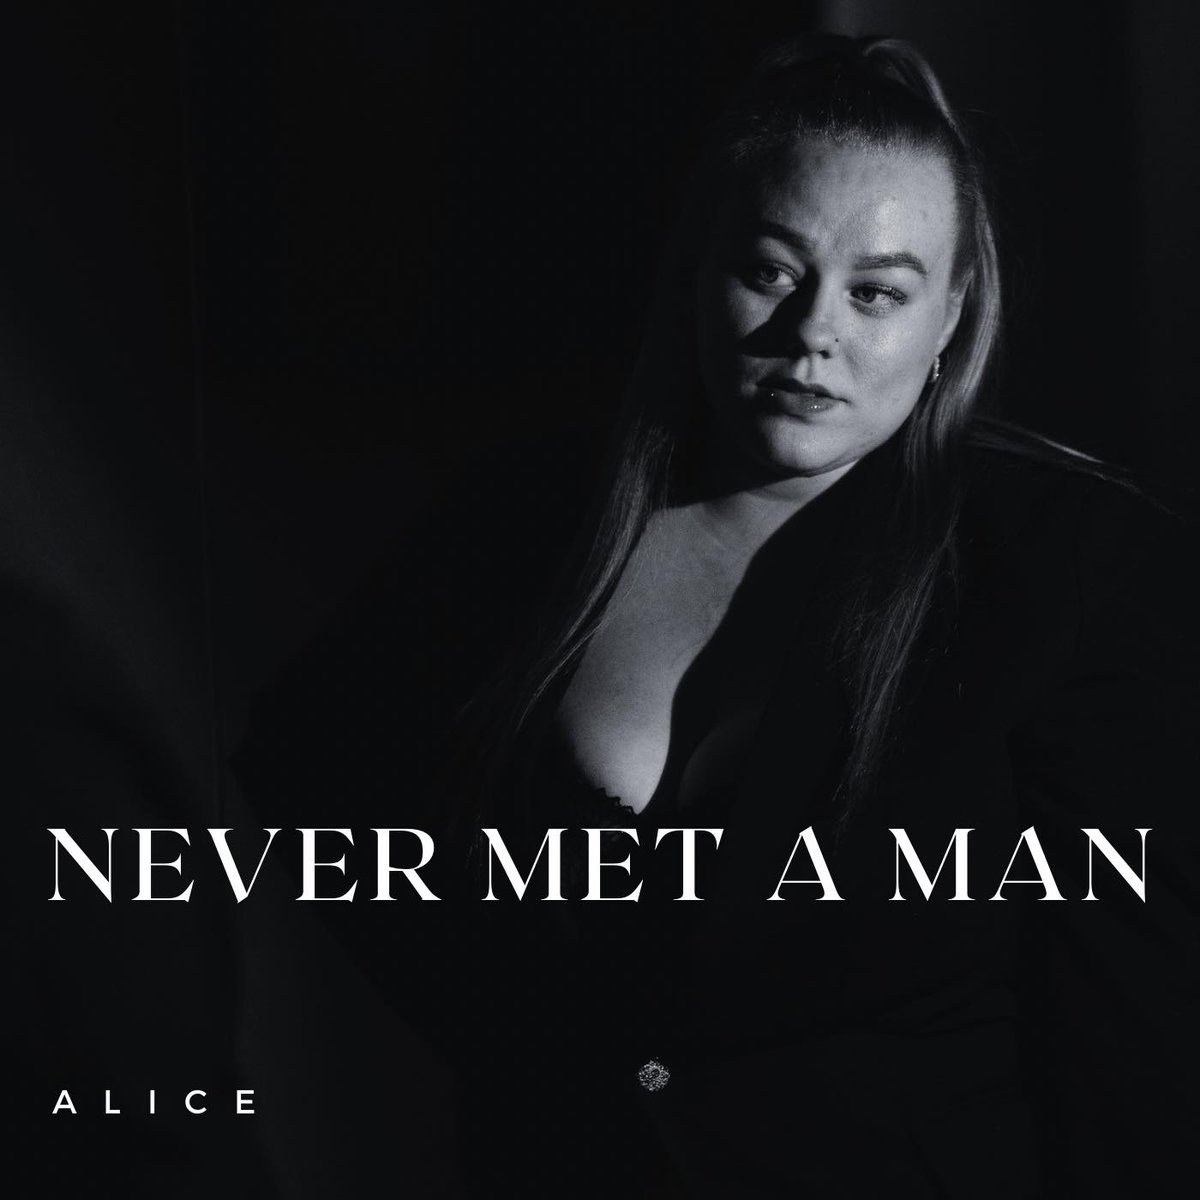 📣 NEW RELEASE! 🎉 NEW RELEASE!🔔

🇳🇱Alice  - 🎶Never met a man

Listen on
📻 CLICKYOURRADIO.COM - ROCK & BLUES
🔊 tinyurl.com/CYRClrBl
📲 tinyurl.com/ORBCYRClRBl

@GeertHakze #blues #bluesmusic #bluesmusician #bluesmusicians #bluesmusiclover #bluesmusicscene #NewRelease